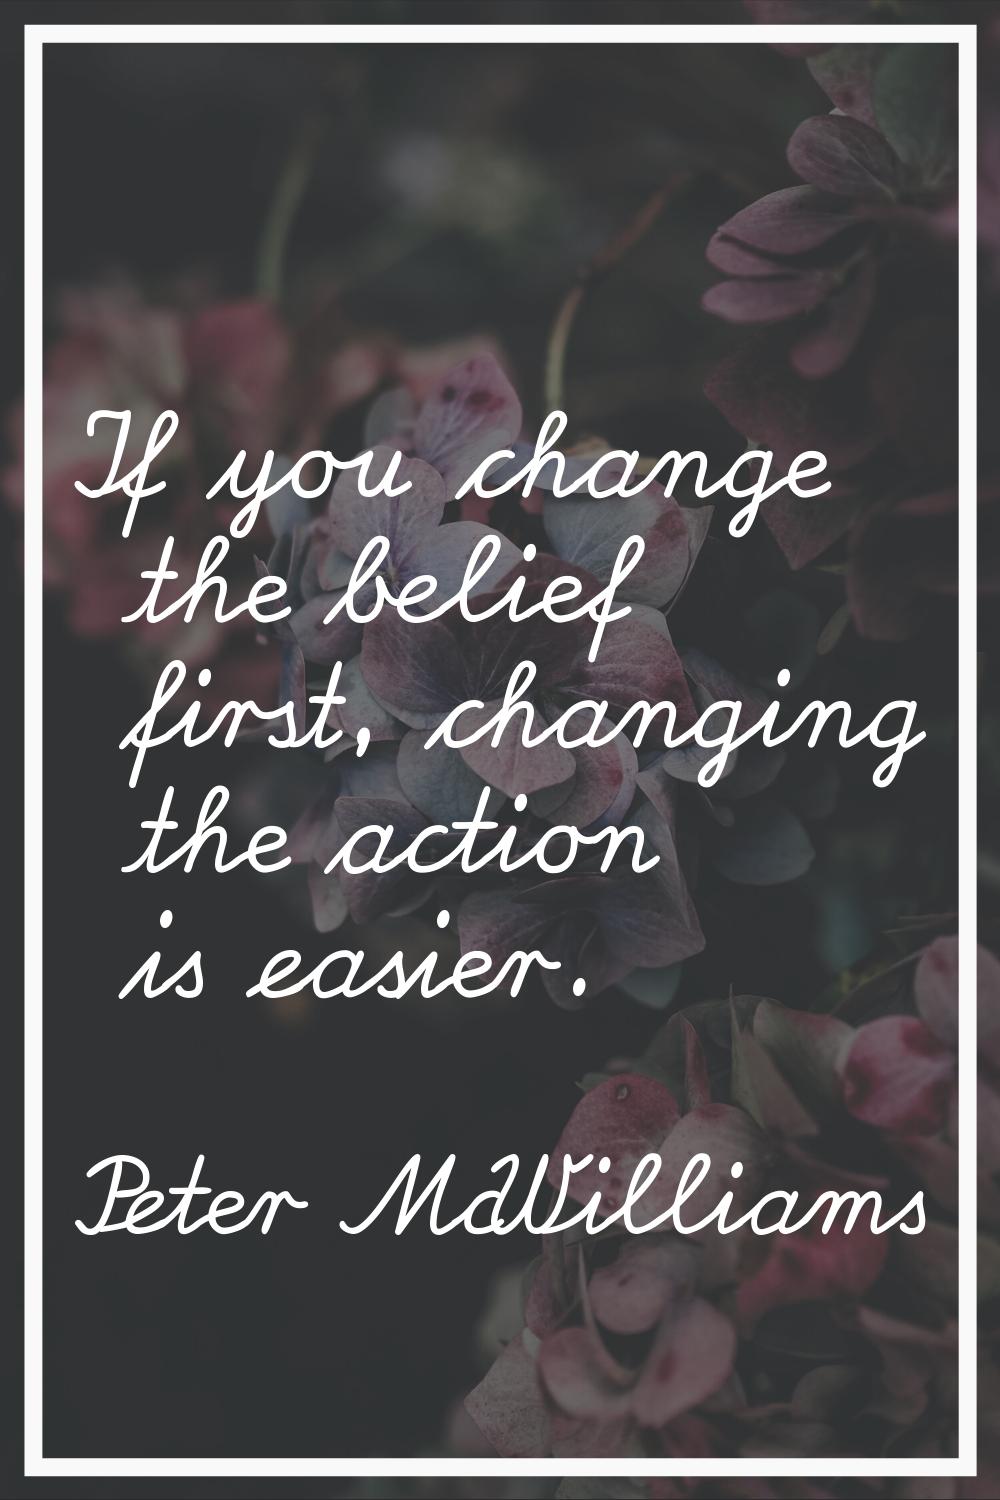 If you change the belief first, changing the action is easier.